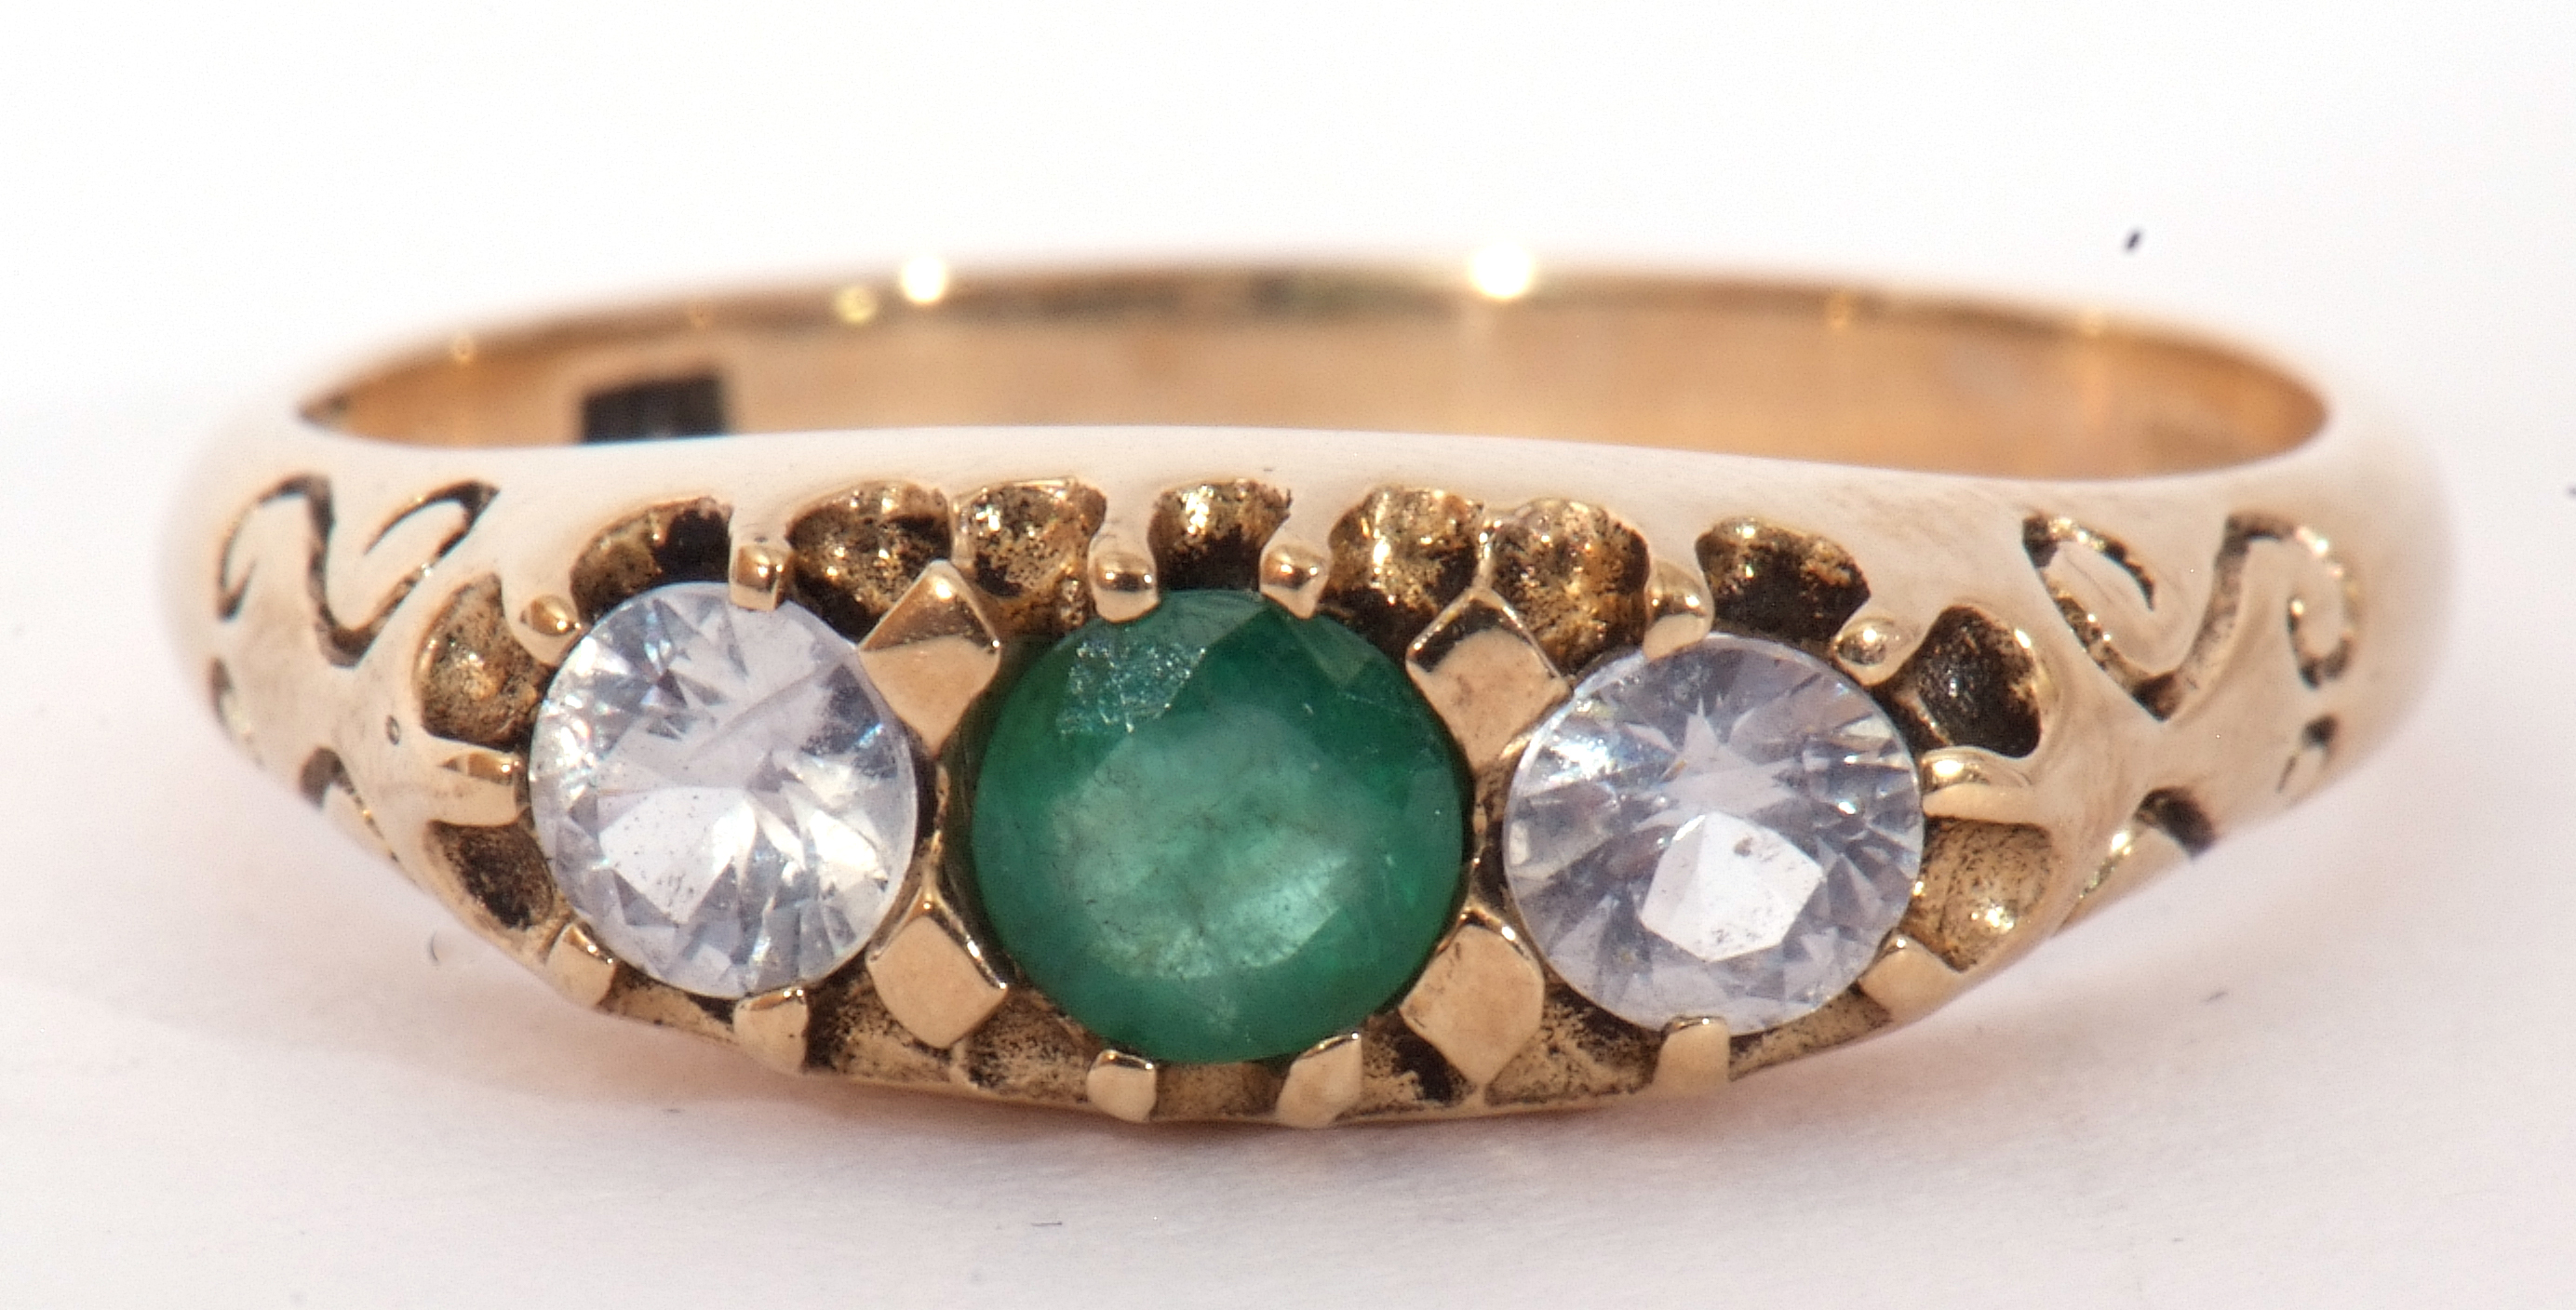 Modern 9ct gold paste set ring centring a green coloured stone between two pastes - Image 9 of 10